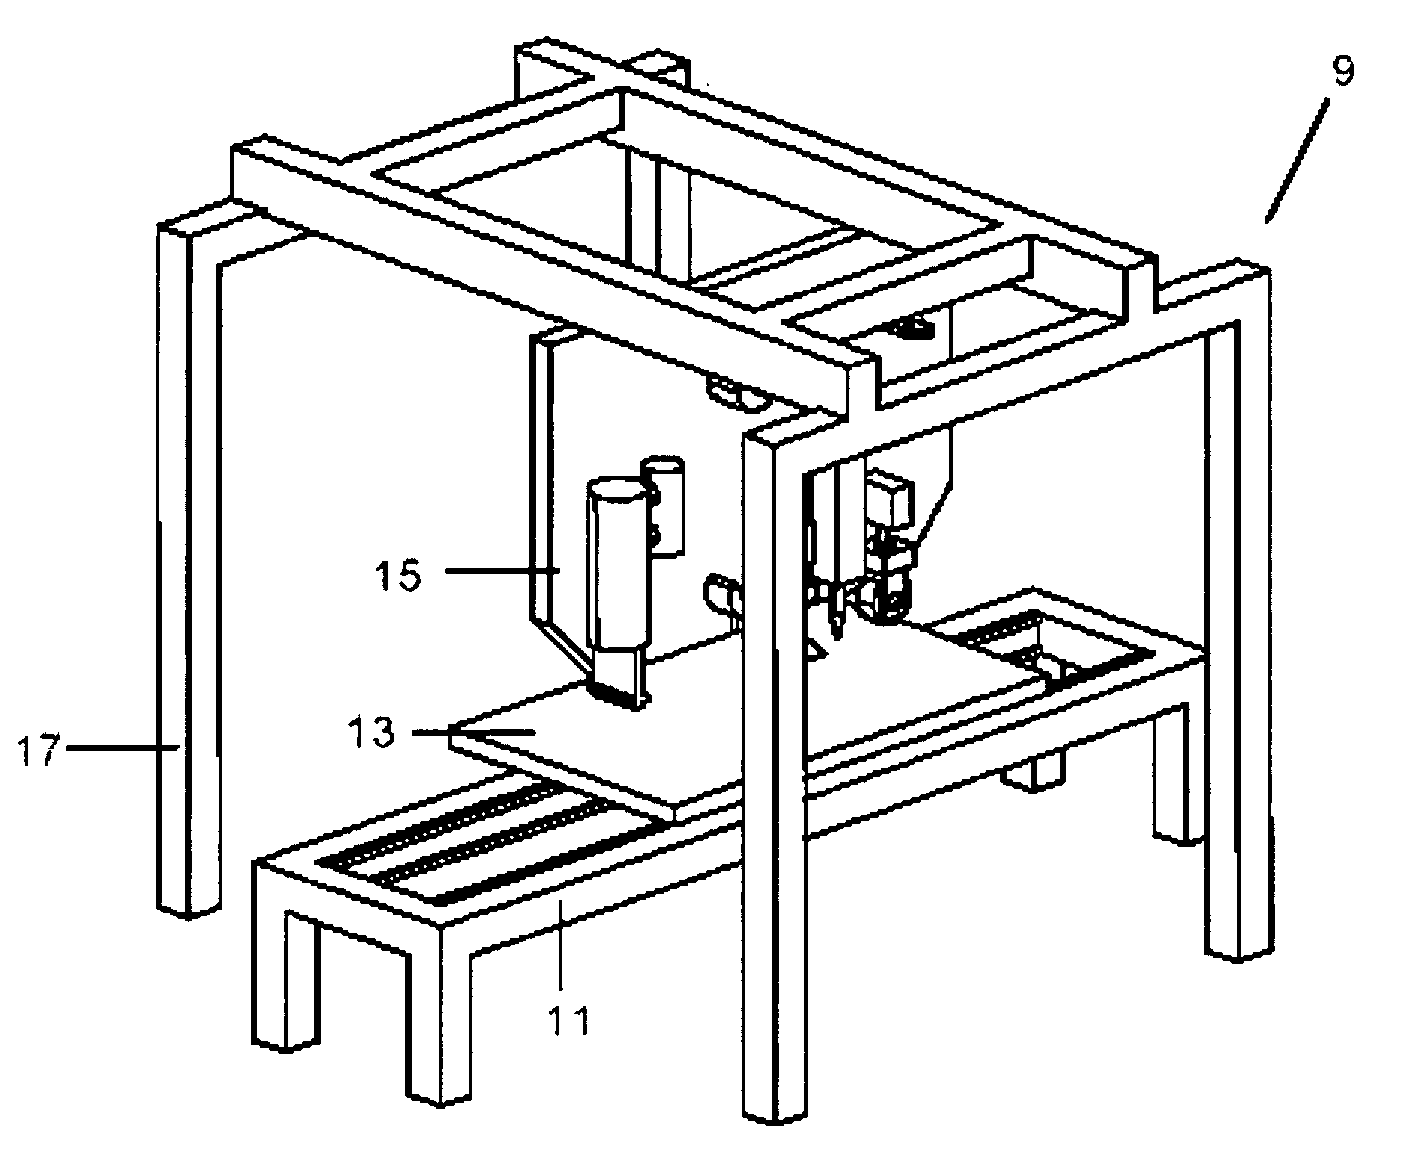 Jig and out-of-autoclave process for manufacturing composite material structures